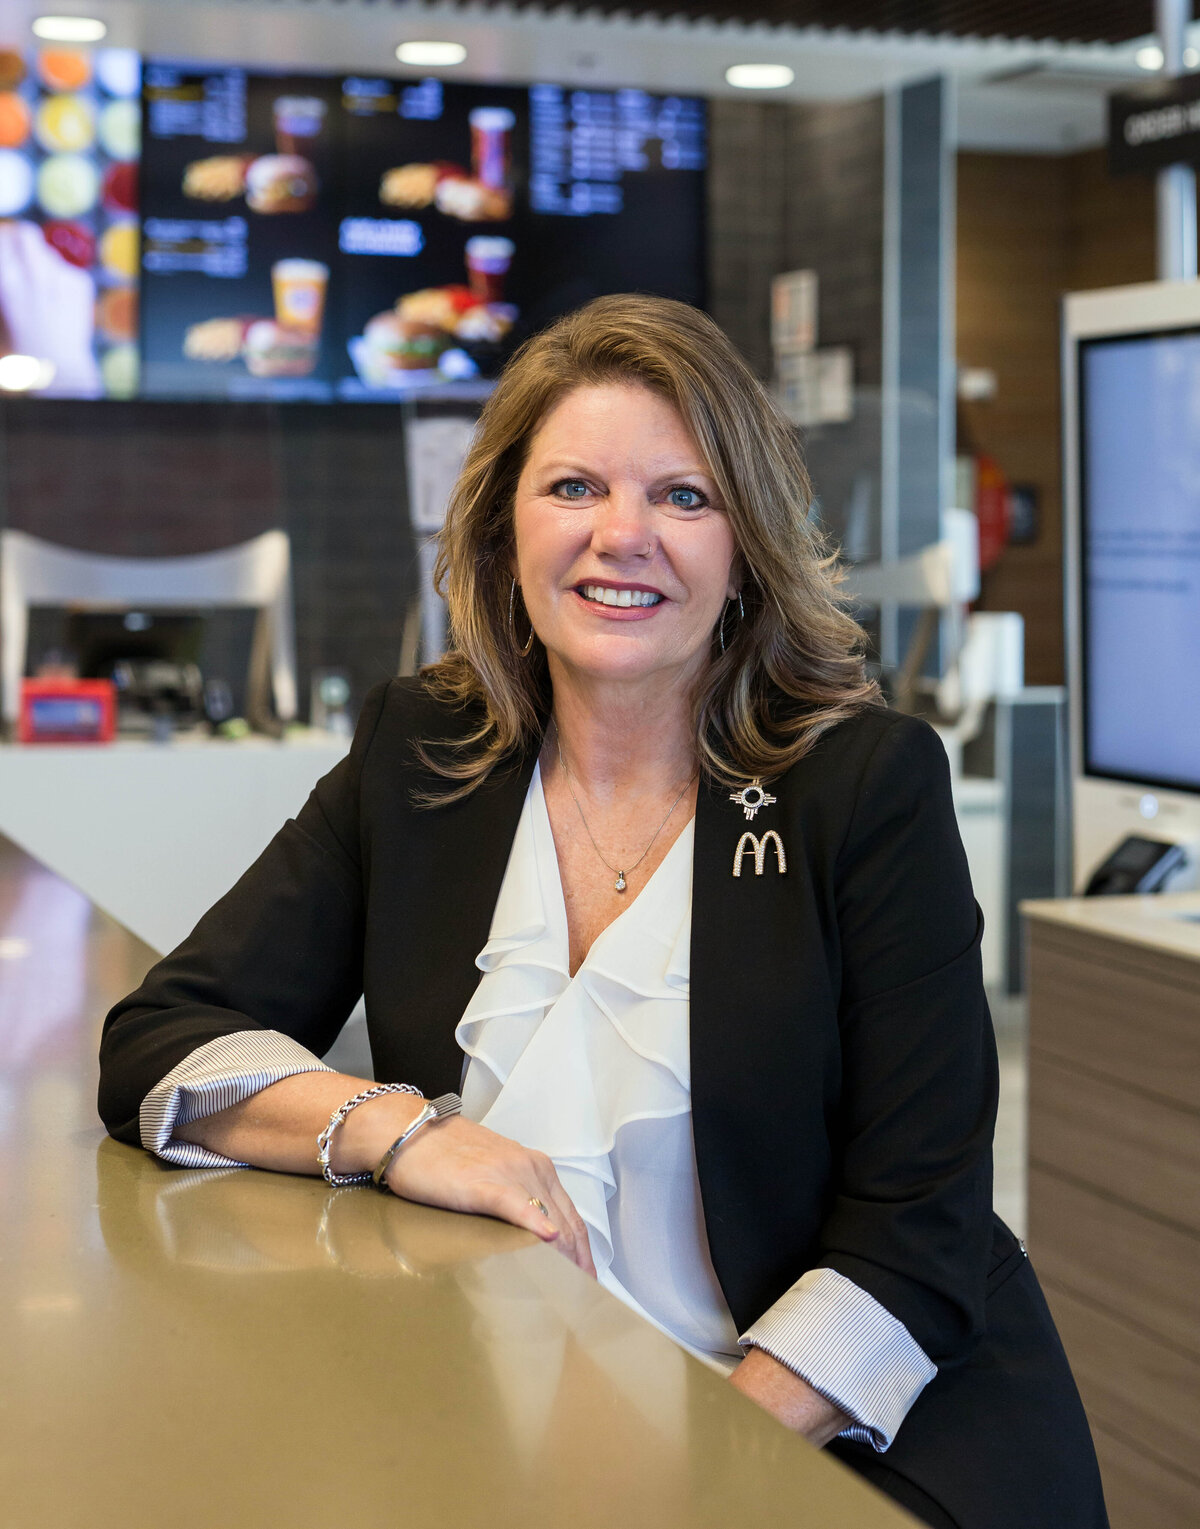 Woman headshot on location inside a McDonald's restaurant where woman is wearing a black suit jacket and white ruffled blouse and smiling at the camera